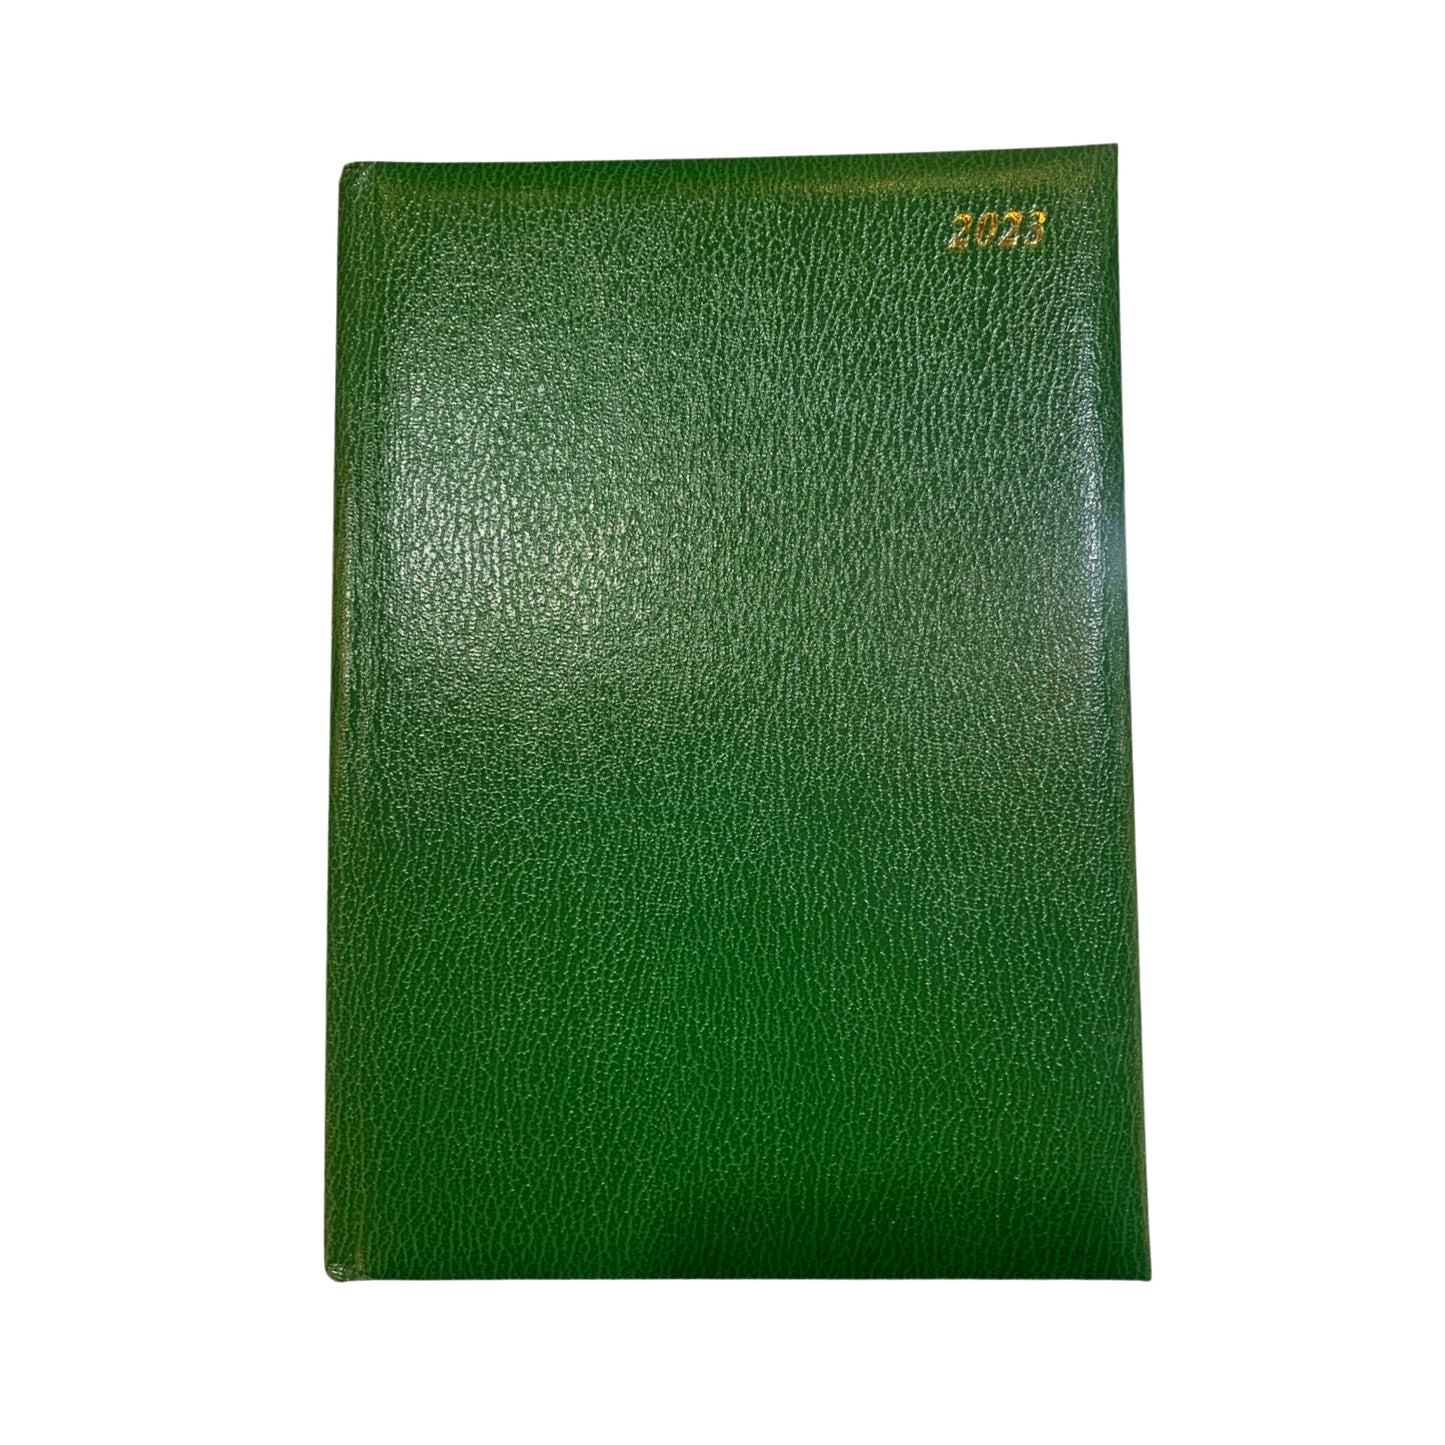 YEAR 2023 Desk Agenda | LEATHER DESK PLANNER | 8 x 6" | One Day Per Page | D186S